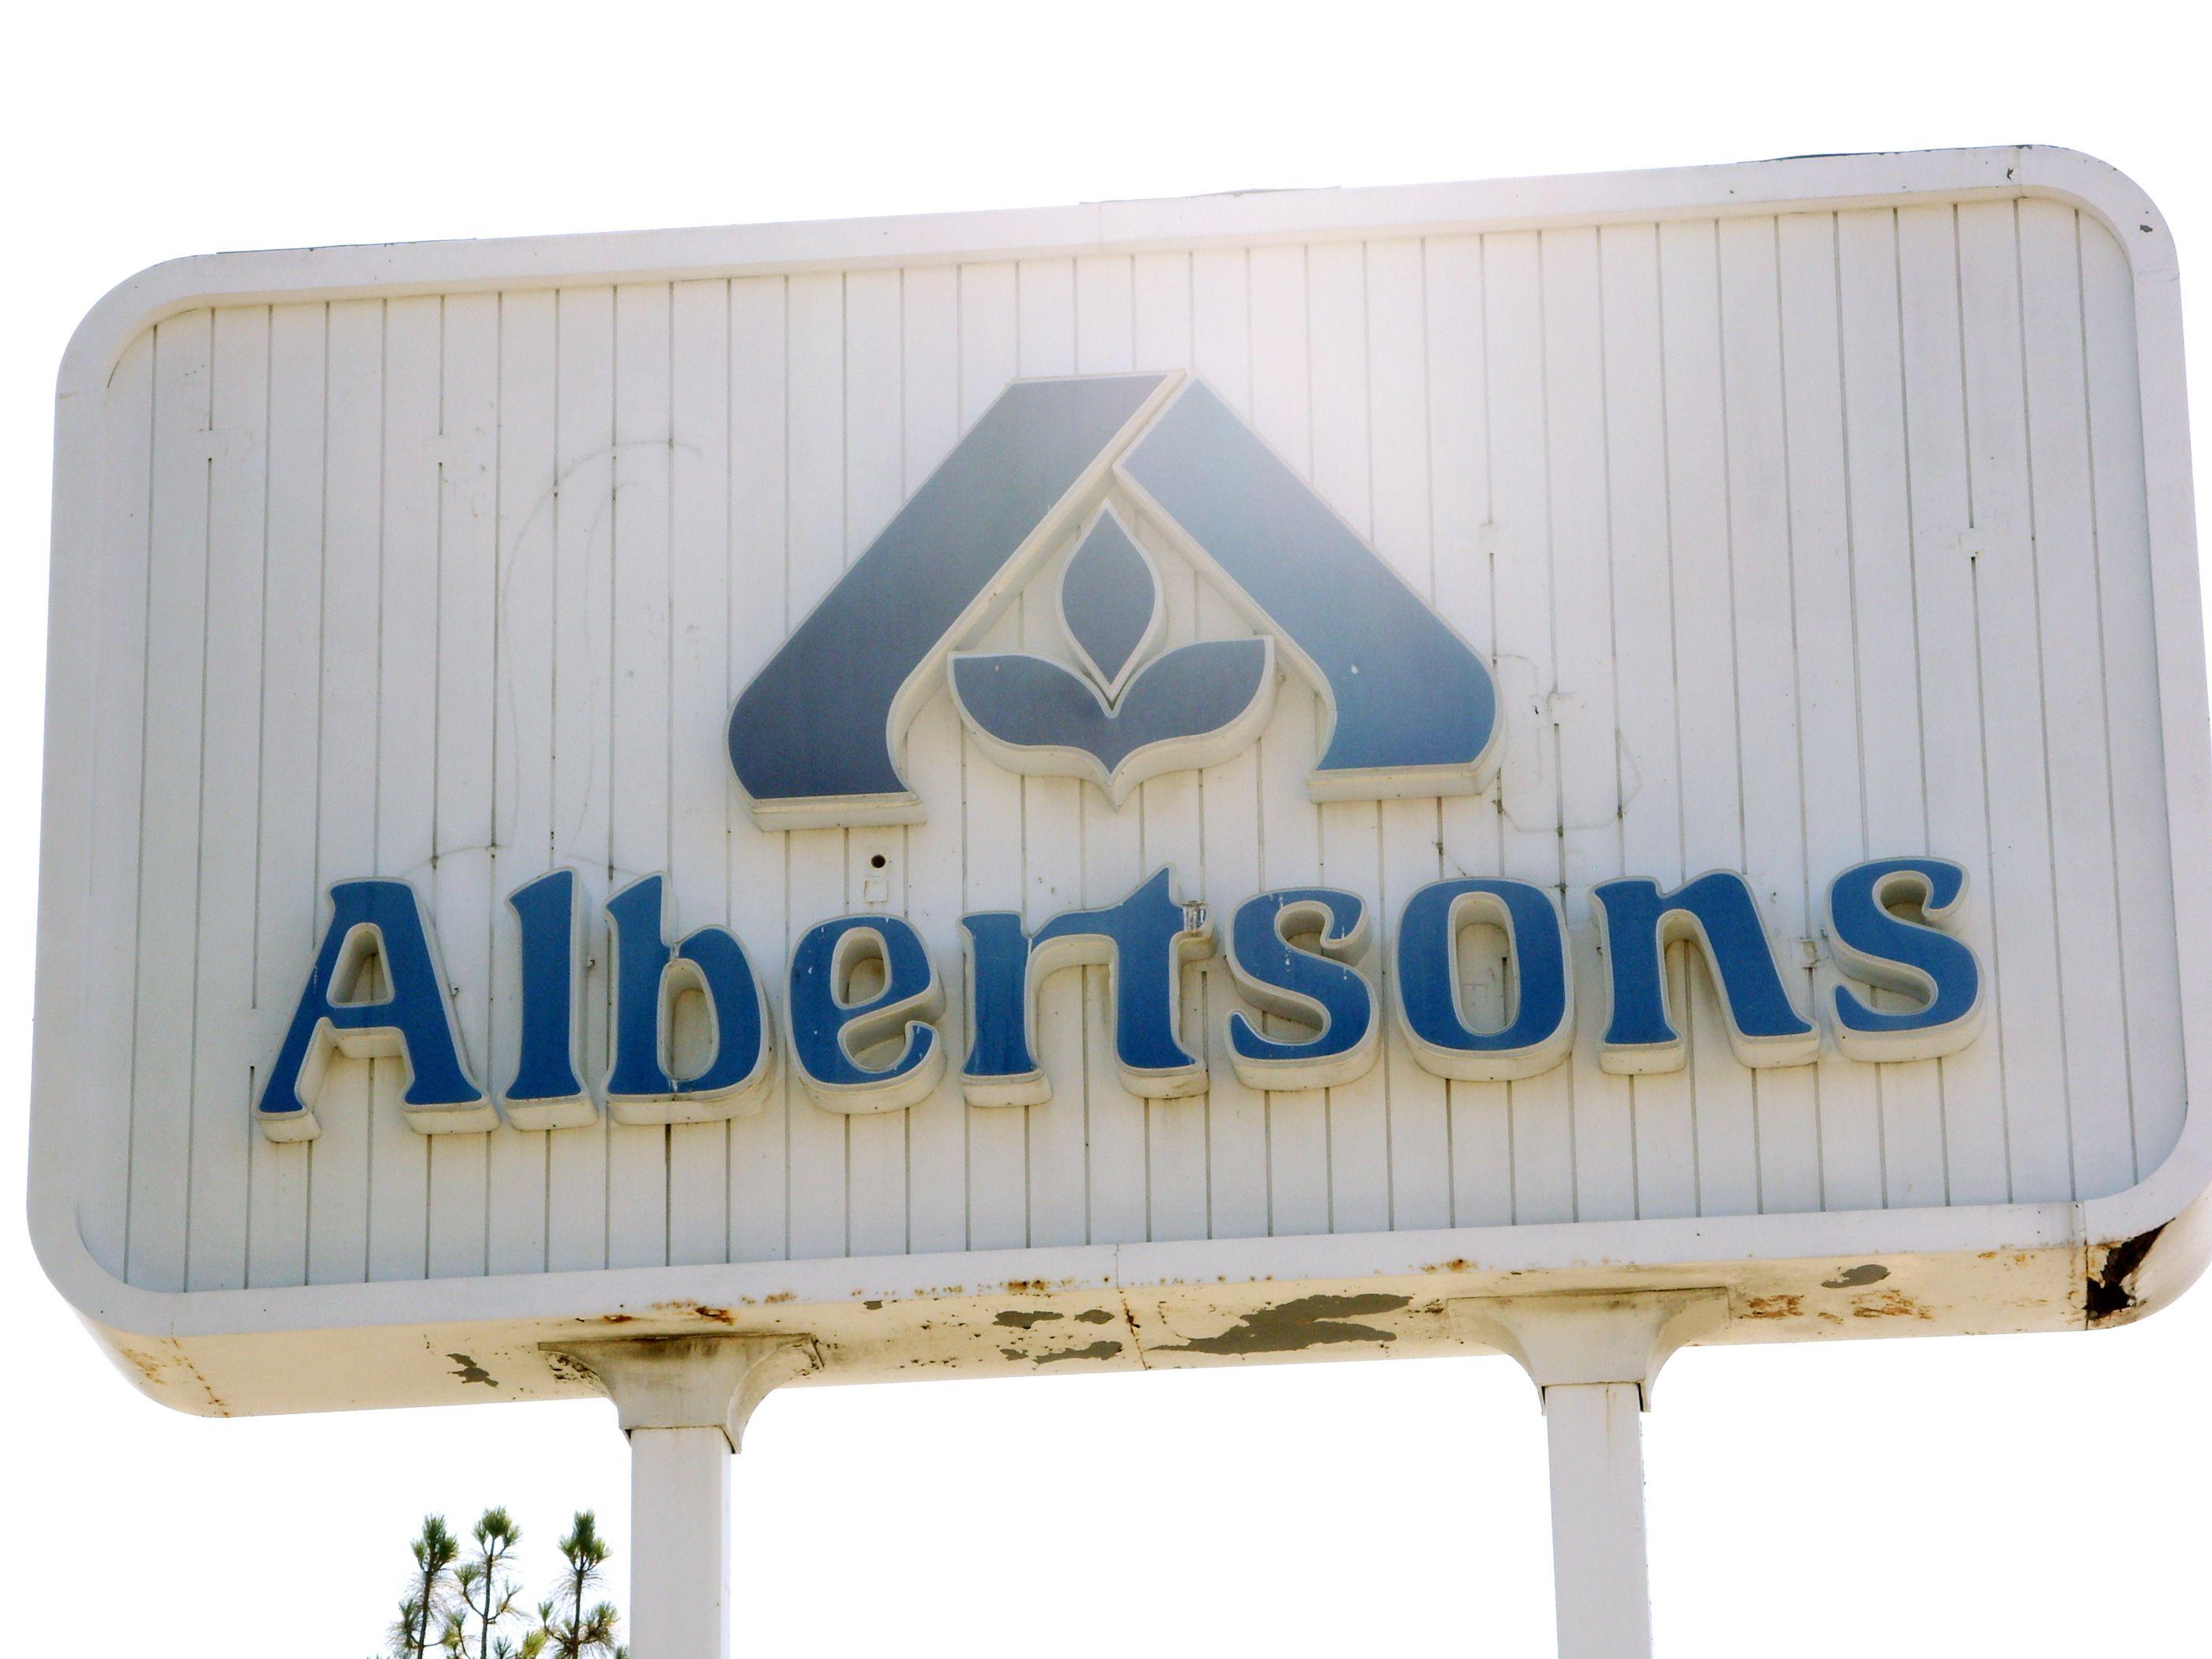 Albertsons Logo - Albertsons logo and signs - Fonts In Use